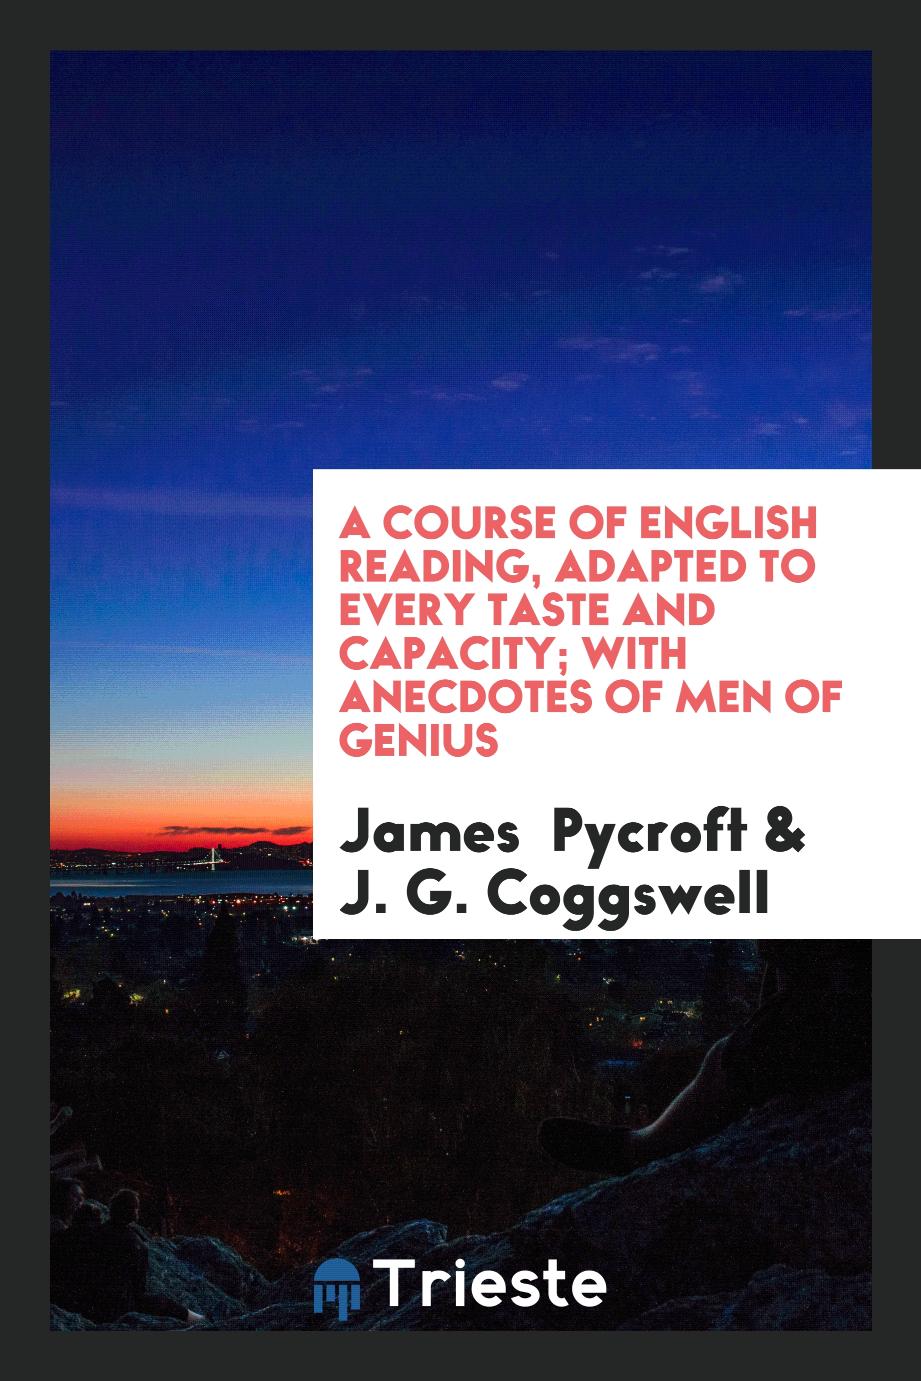 A Course of English Reading, Adapted to Every Taste and Capacity; With Anecdotes of Men of Genius